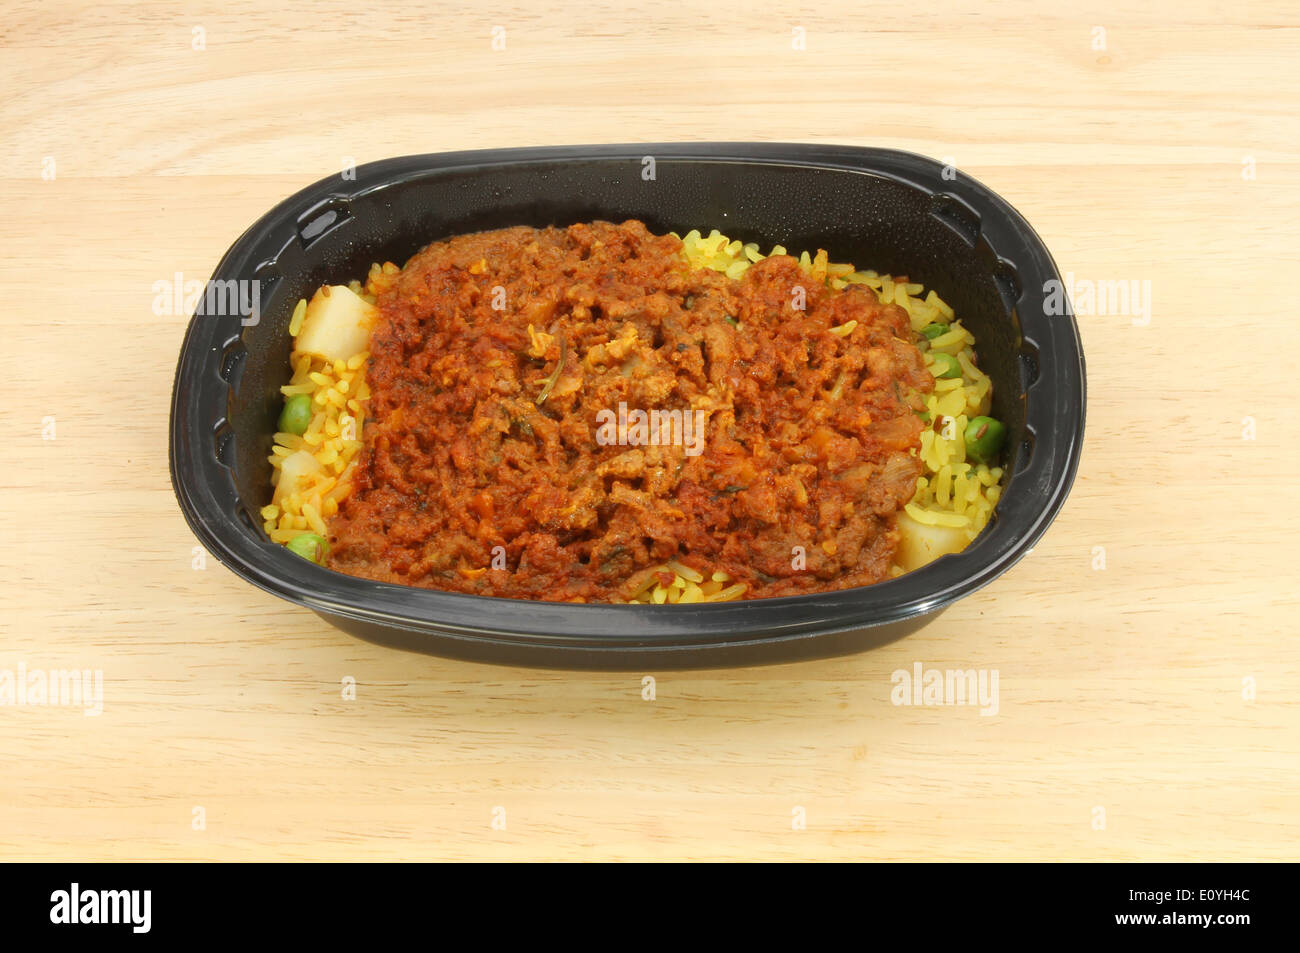 Convenience meal, lamb biryani, in a plastic tray on a wooden tabletop Stock Photo